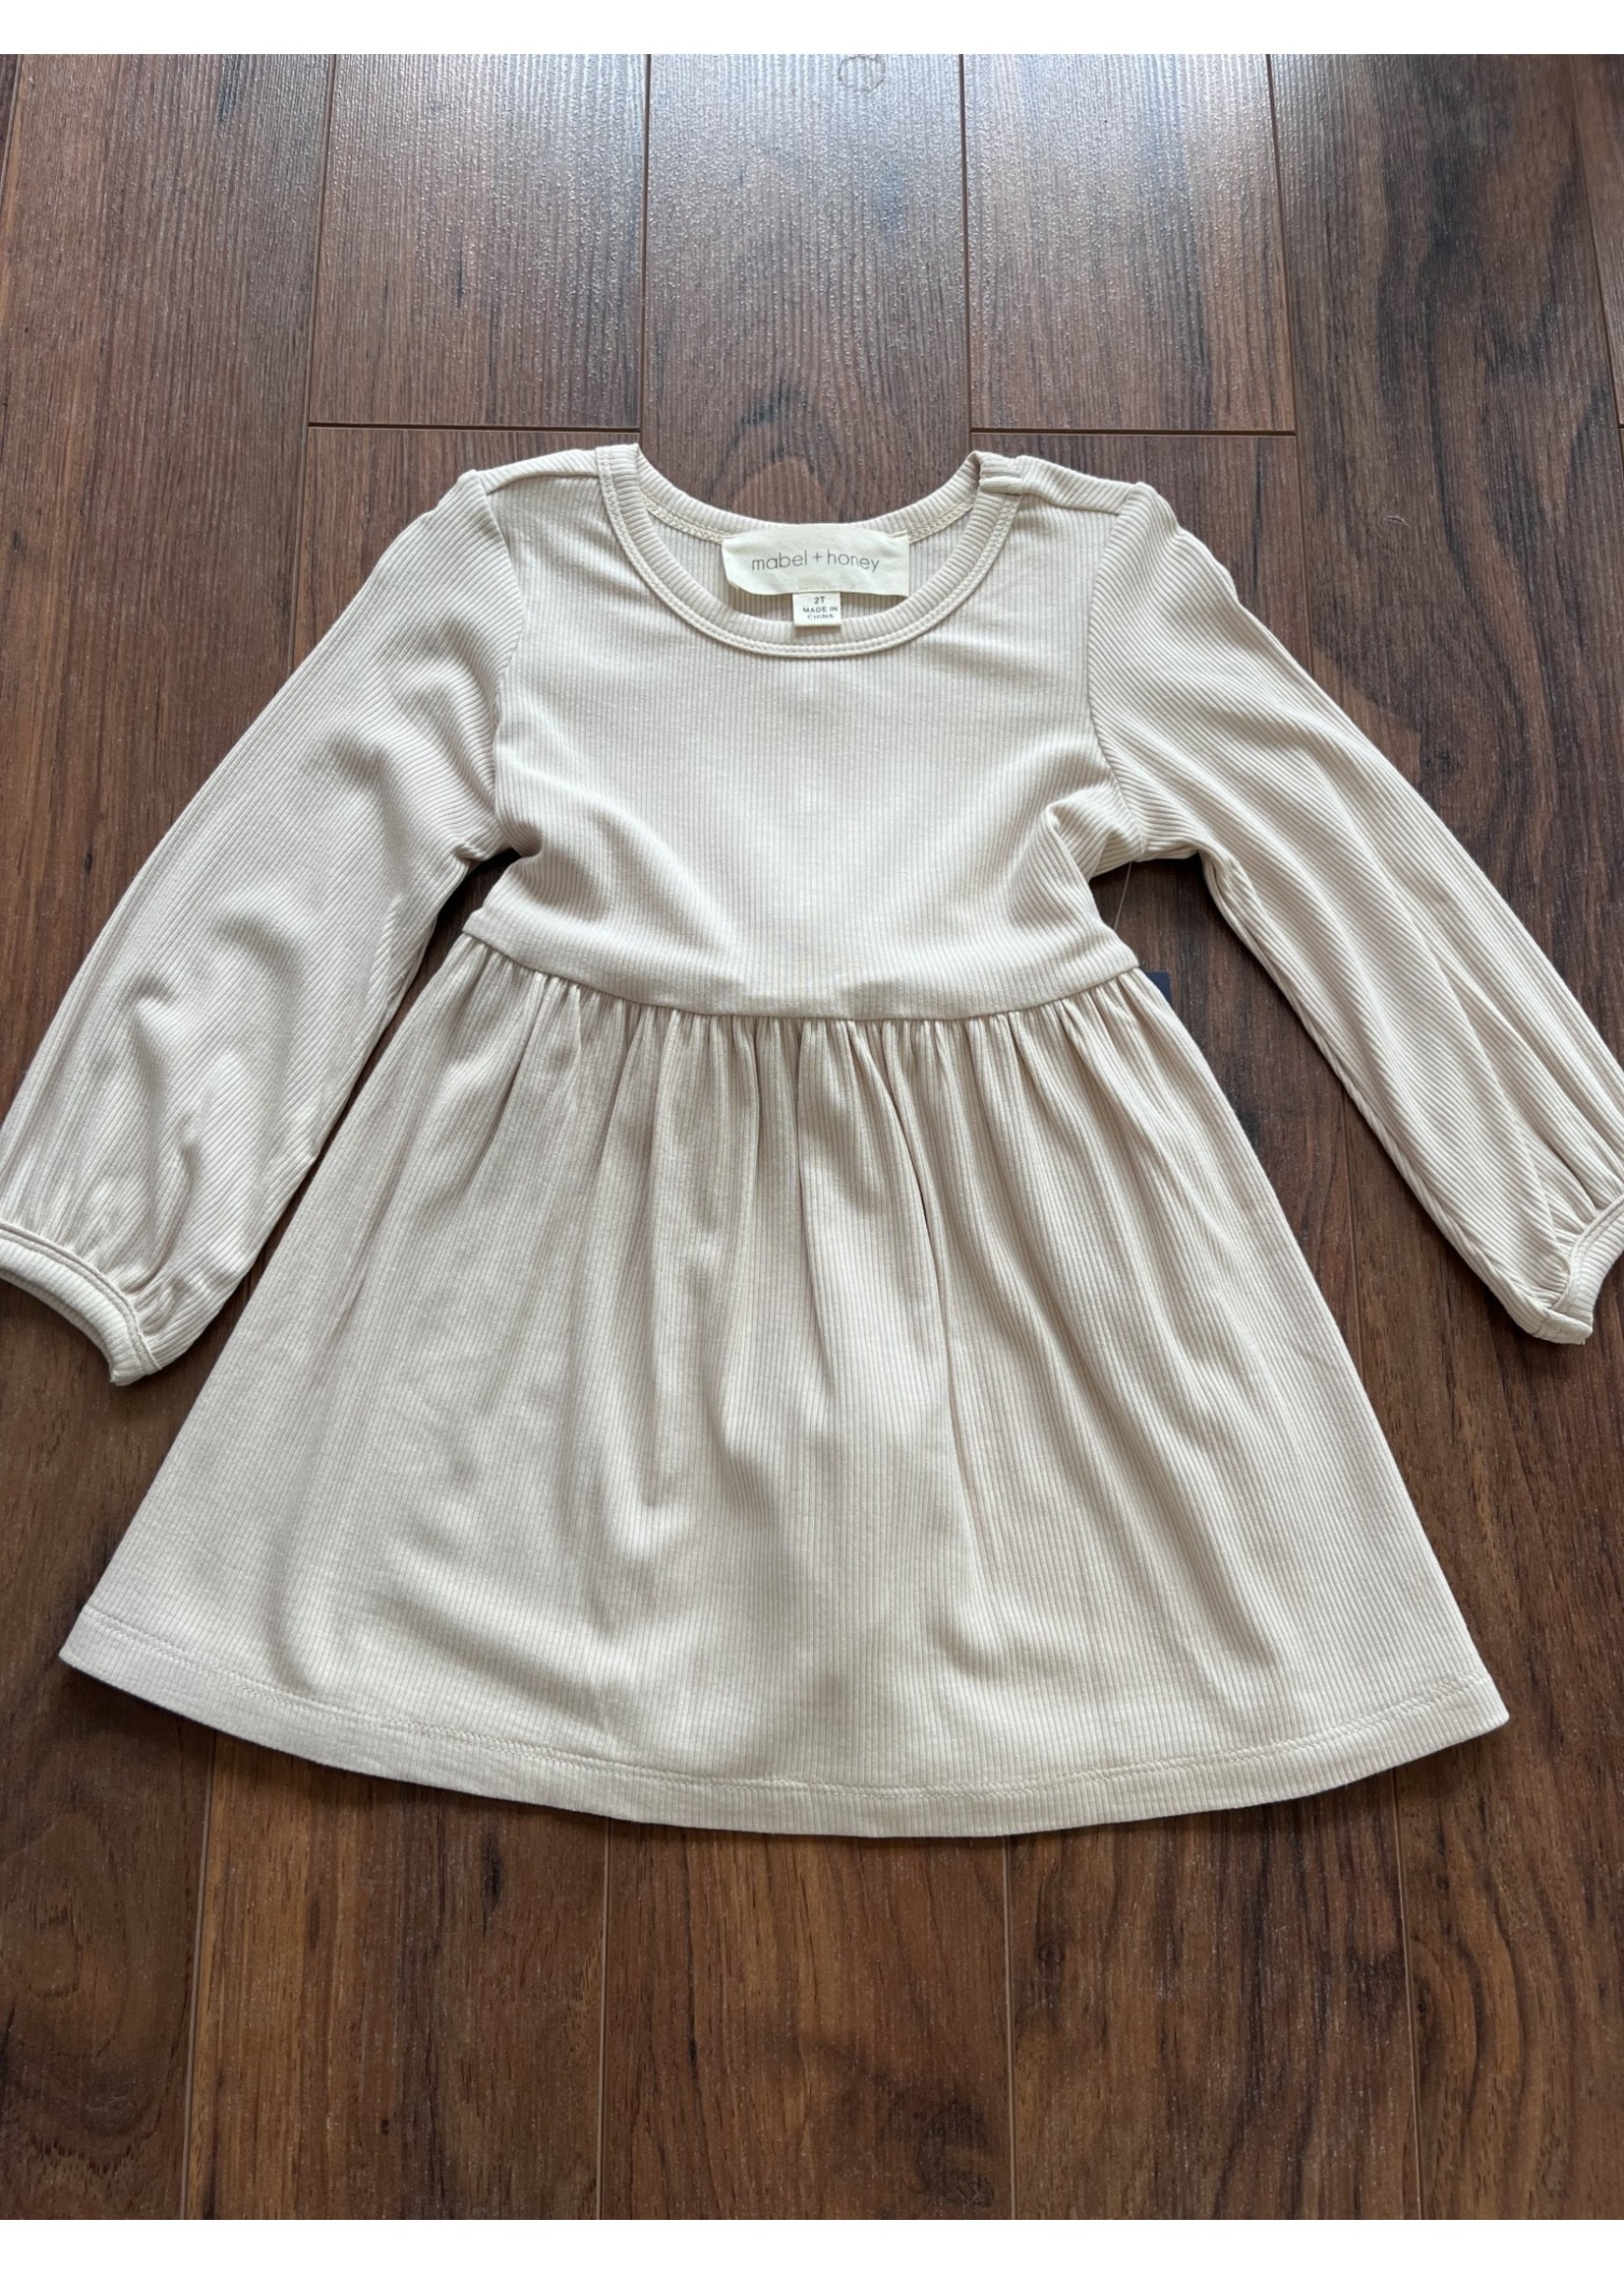 MABEL&HONEY DRESS/BUTTON ON THE BACK